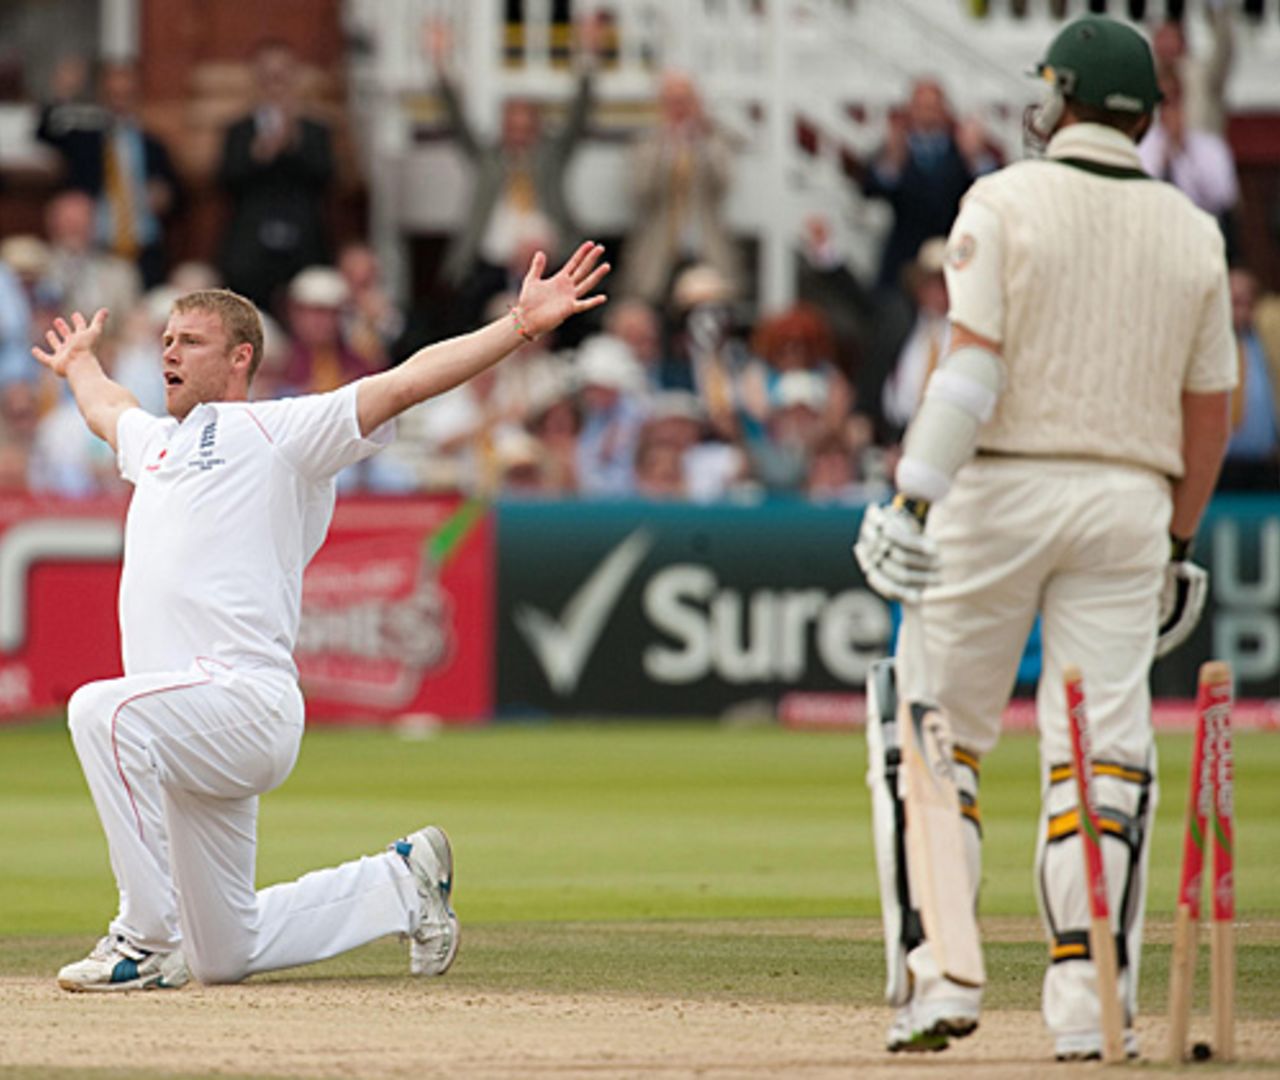 Andrew Flintoff celebrates his five-wicket haul in his last appearance in a Test at Lord's, England v Australia, 2nd Test, Lord's, 5th day, July 20, 2009